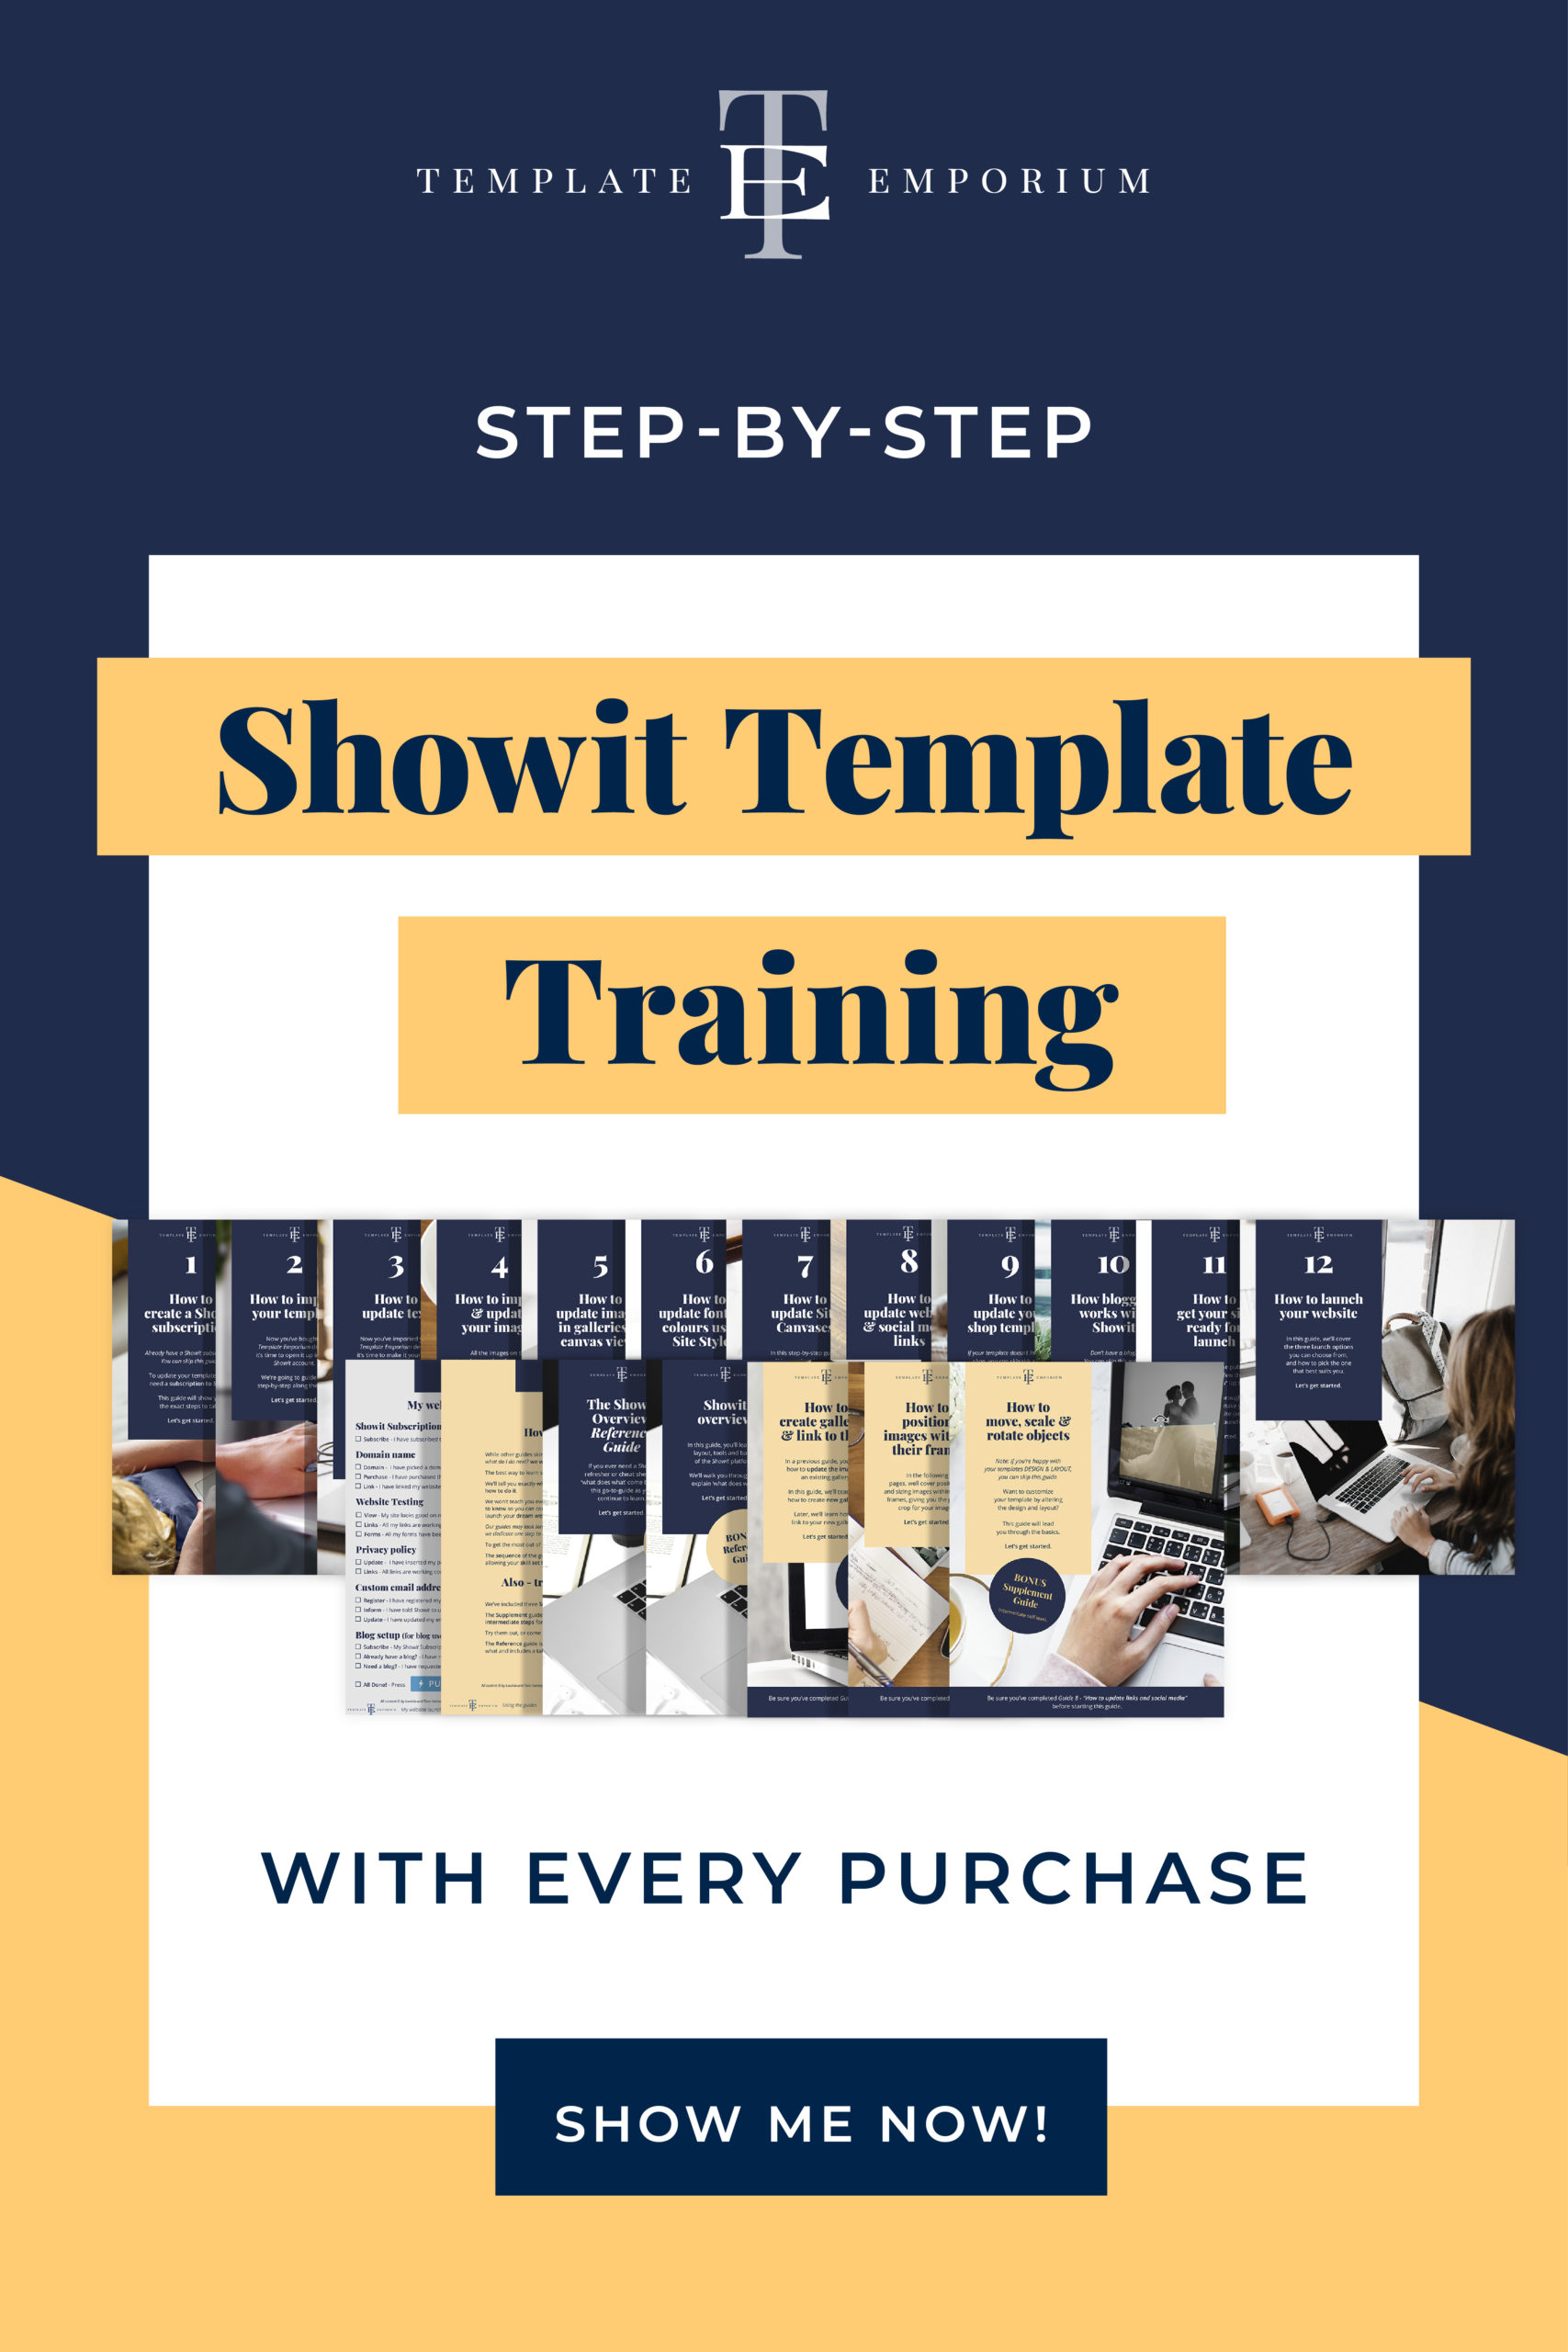 How do I access the Showit Template Training?